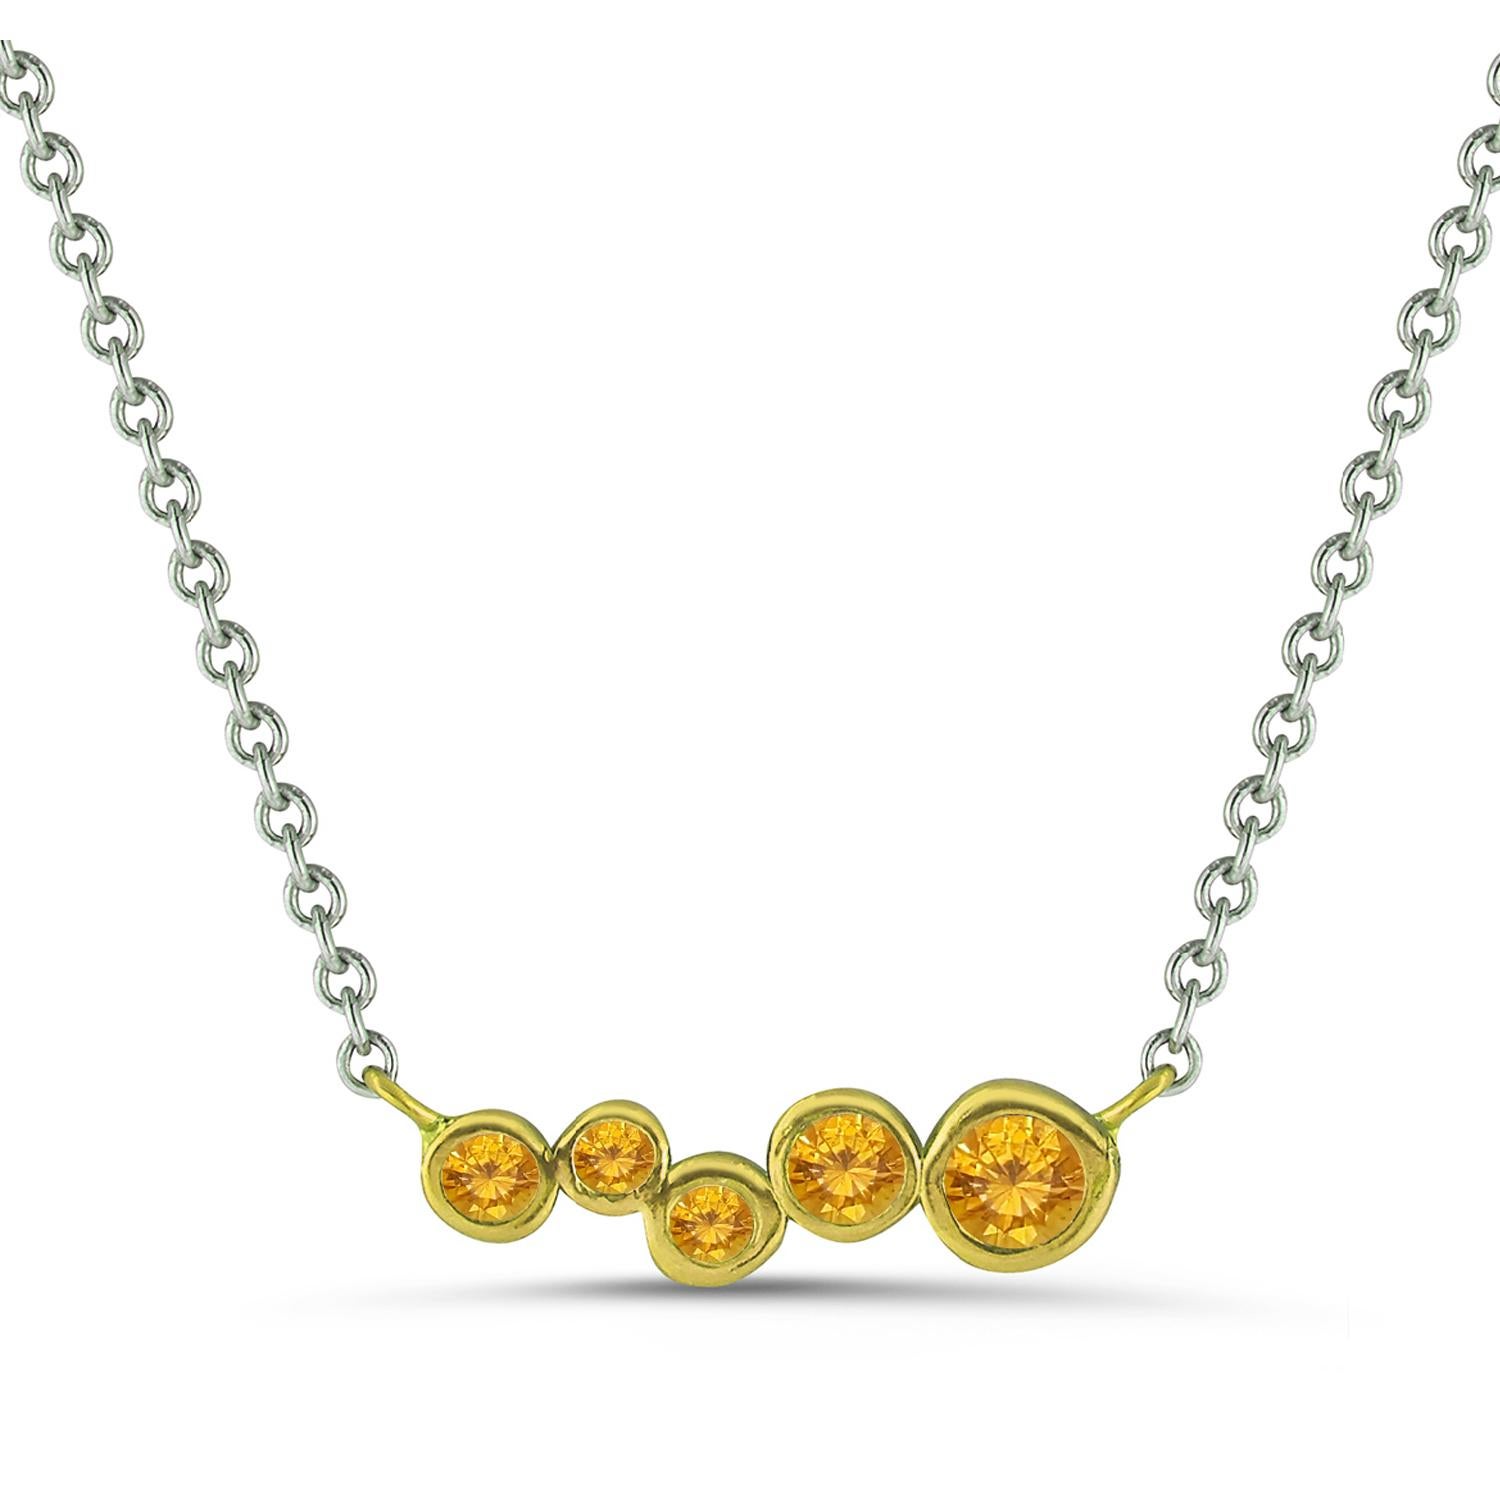 Hi June Parker's version of the classic bar pendant sprinkled with tapering sizes of Yellow Sapphire stones ceramic plated with Lime Yellow to add a pop of electric color to your neck.

Inspired by seeing the cross-section view of life, as if